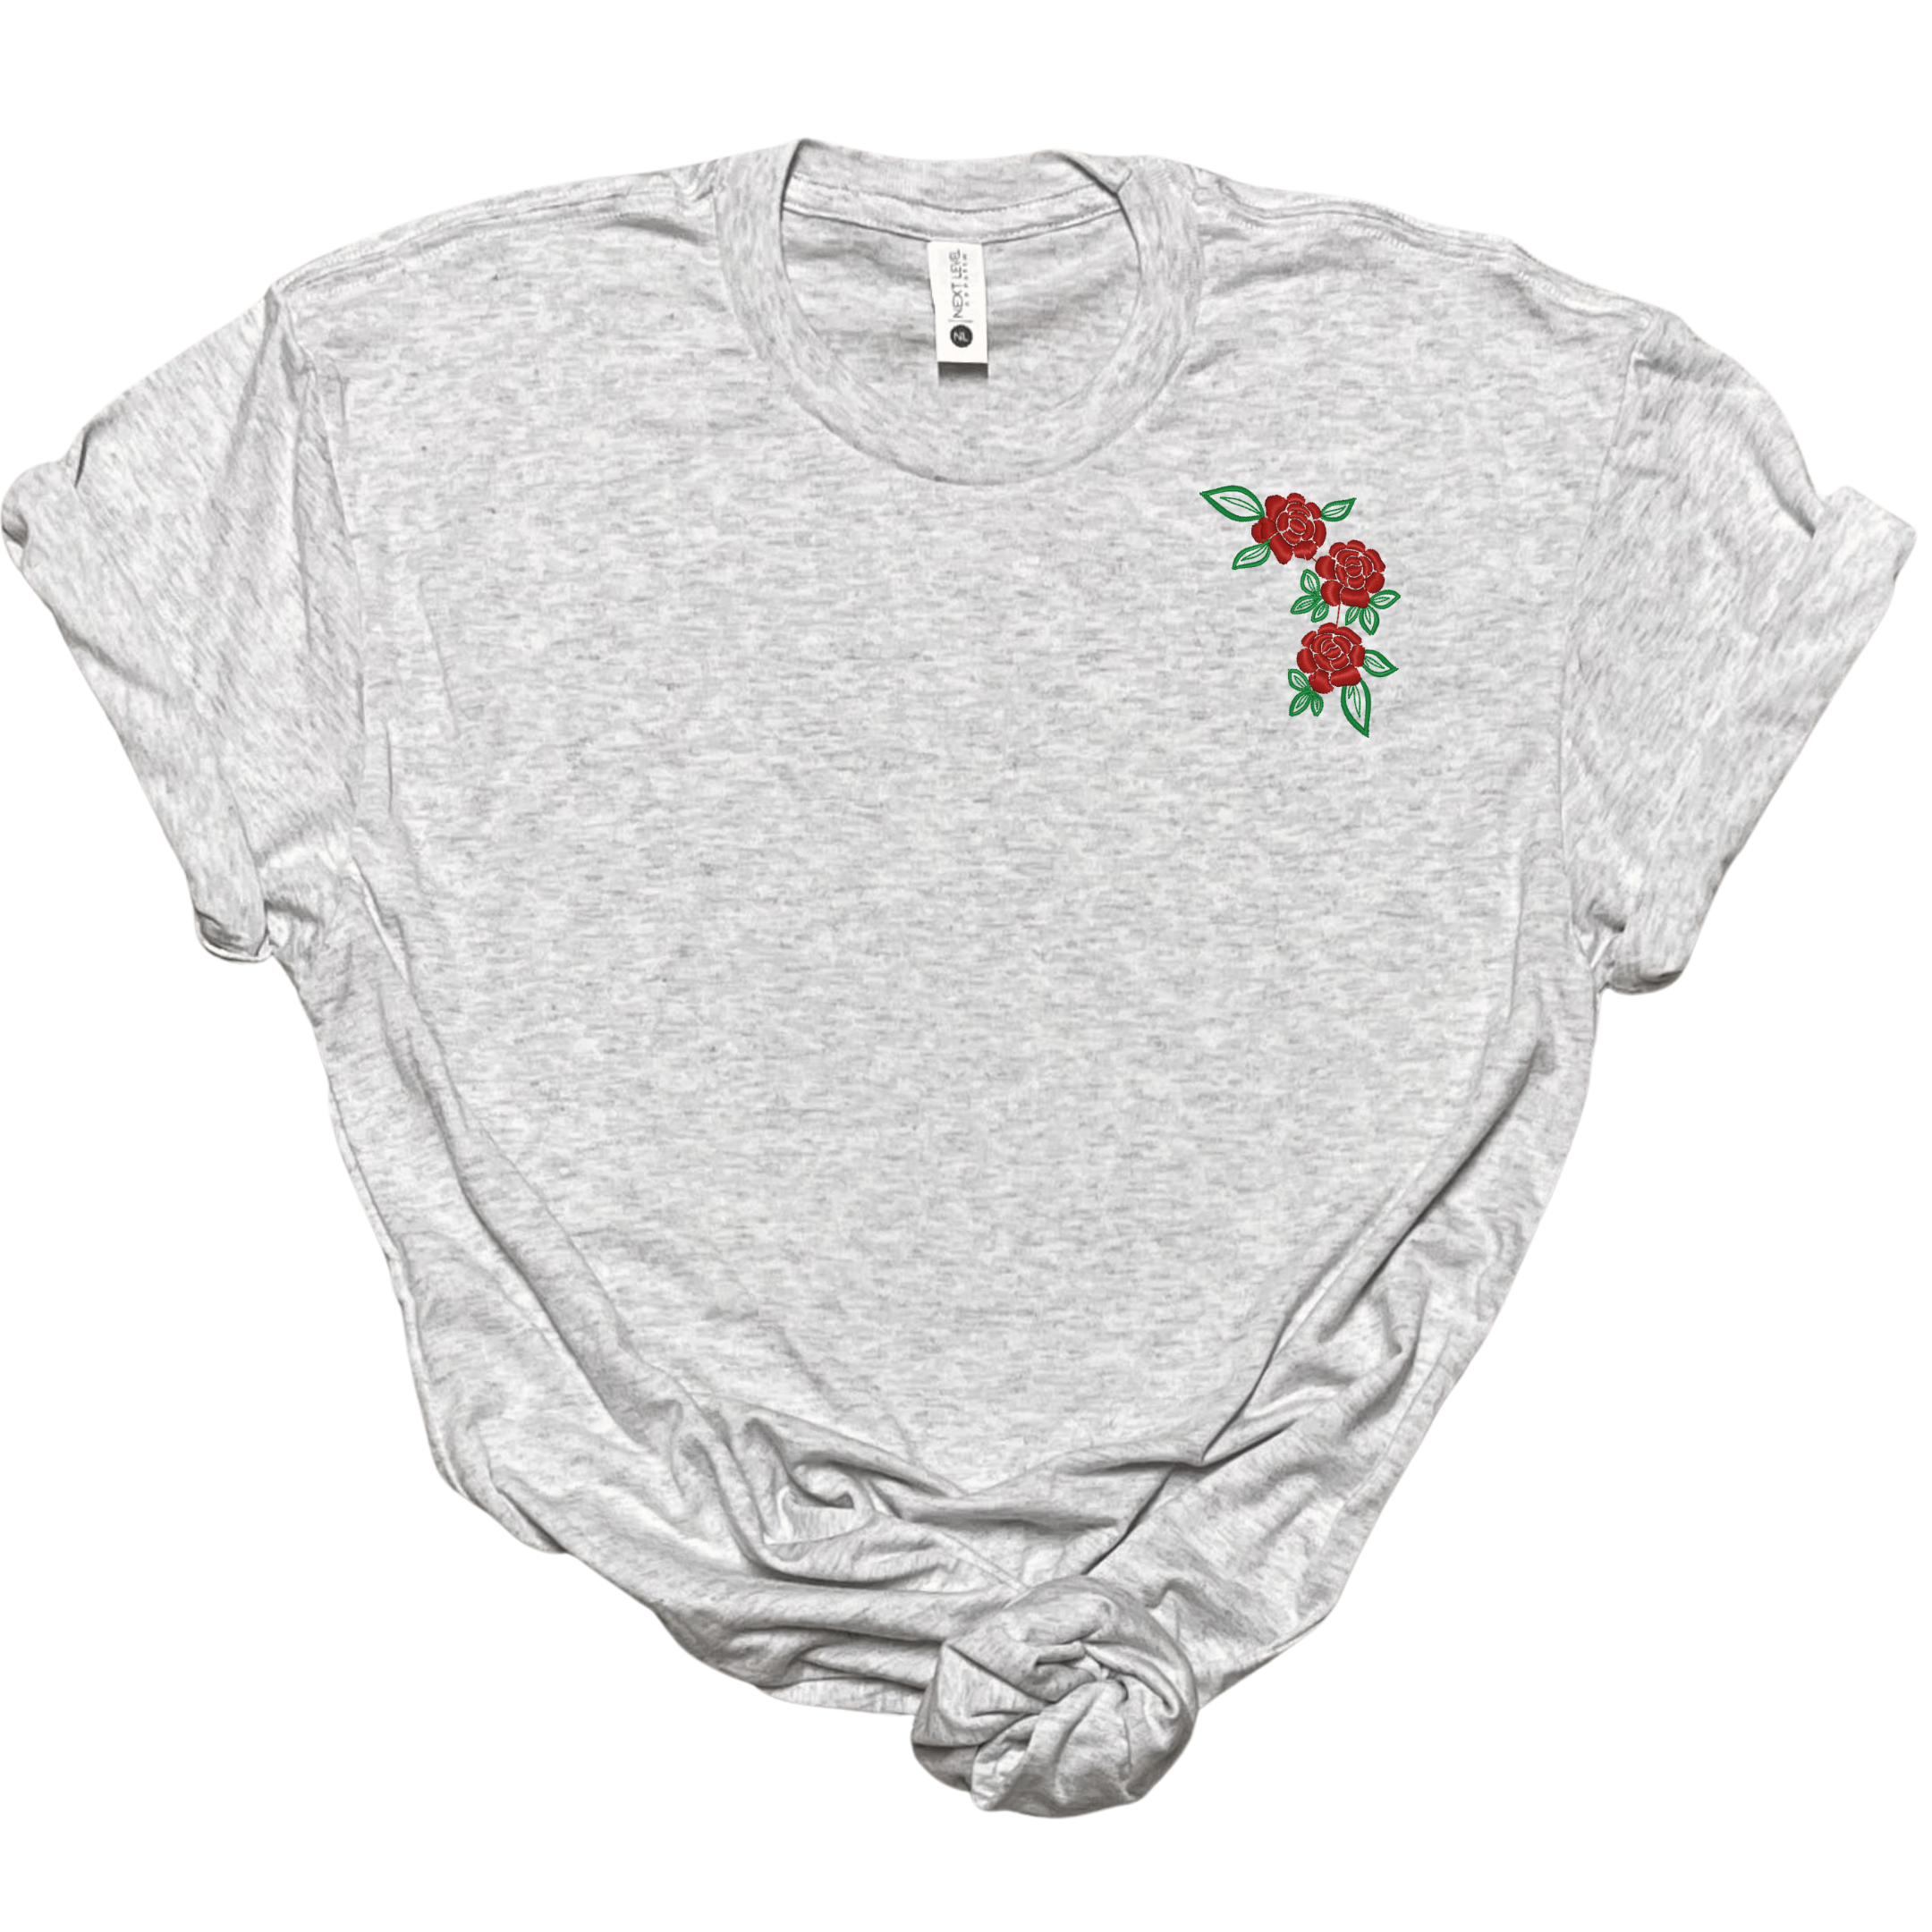 Rose Embroidered Tee Shirt, Unisex